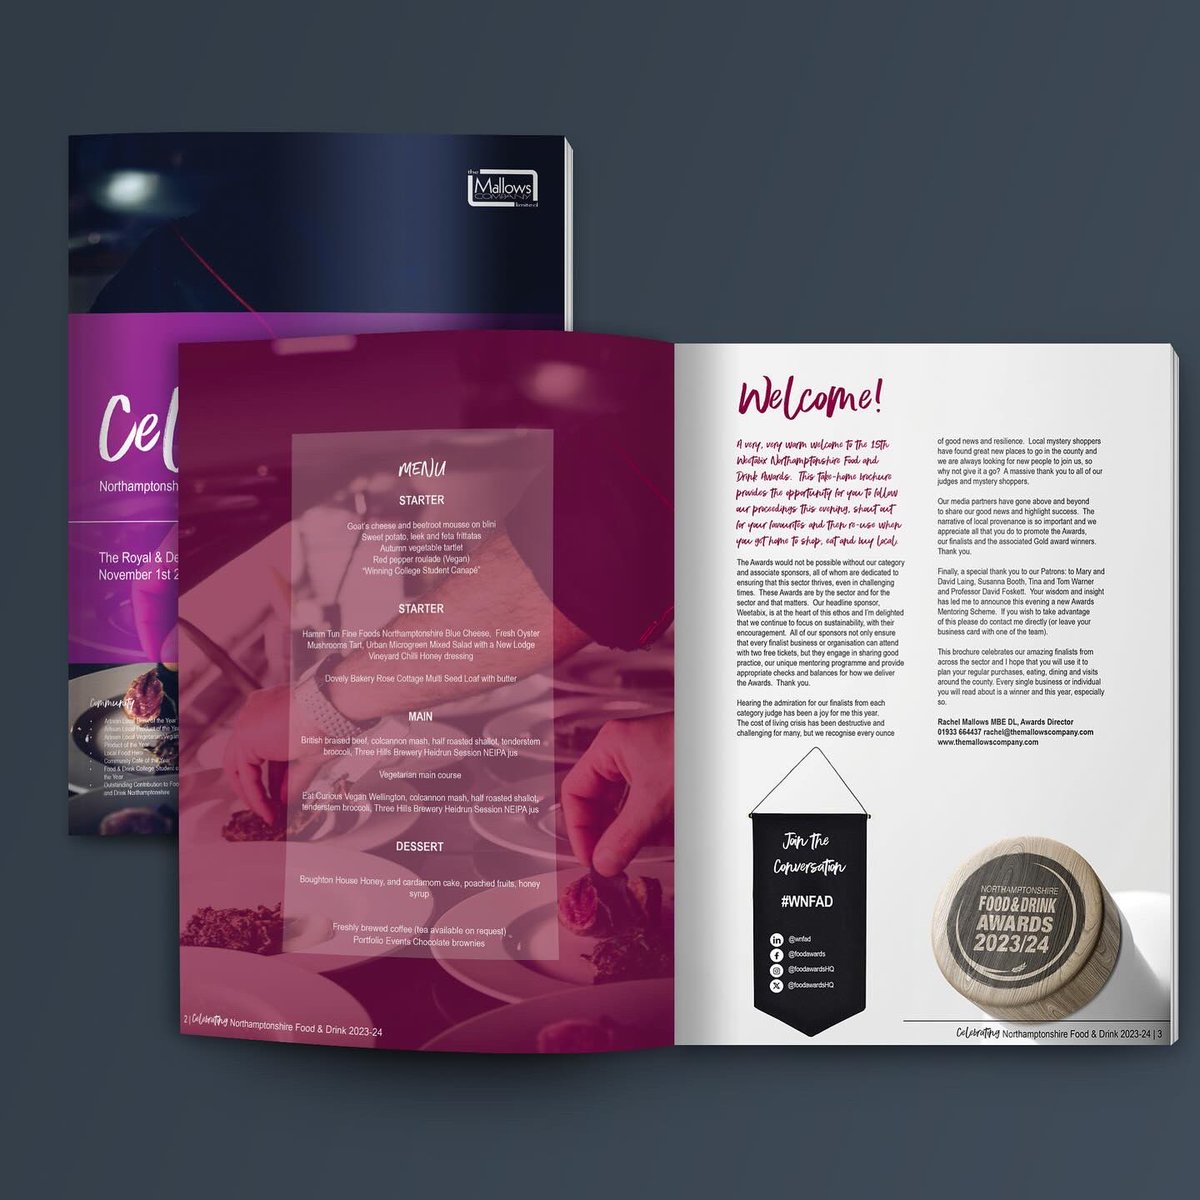 Some recent brochure design projects we’ve delivered for some of our clients locally… Got creative projects on *your* to do list that need some support? Reach out to us today! info@soverycreative.com